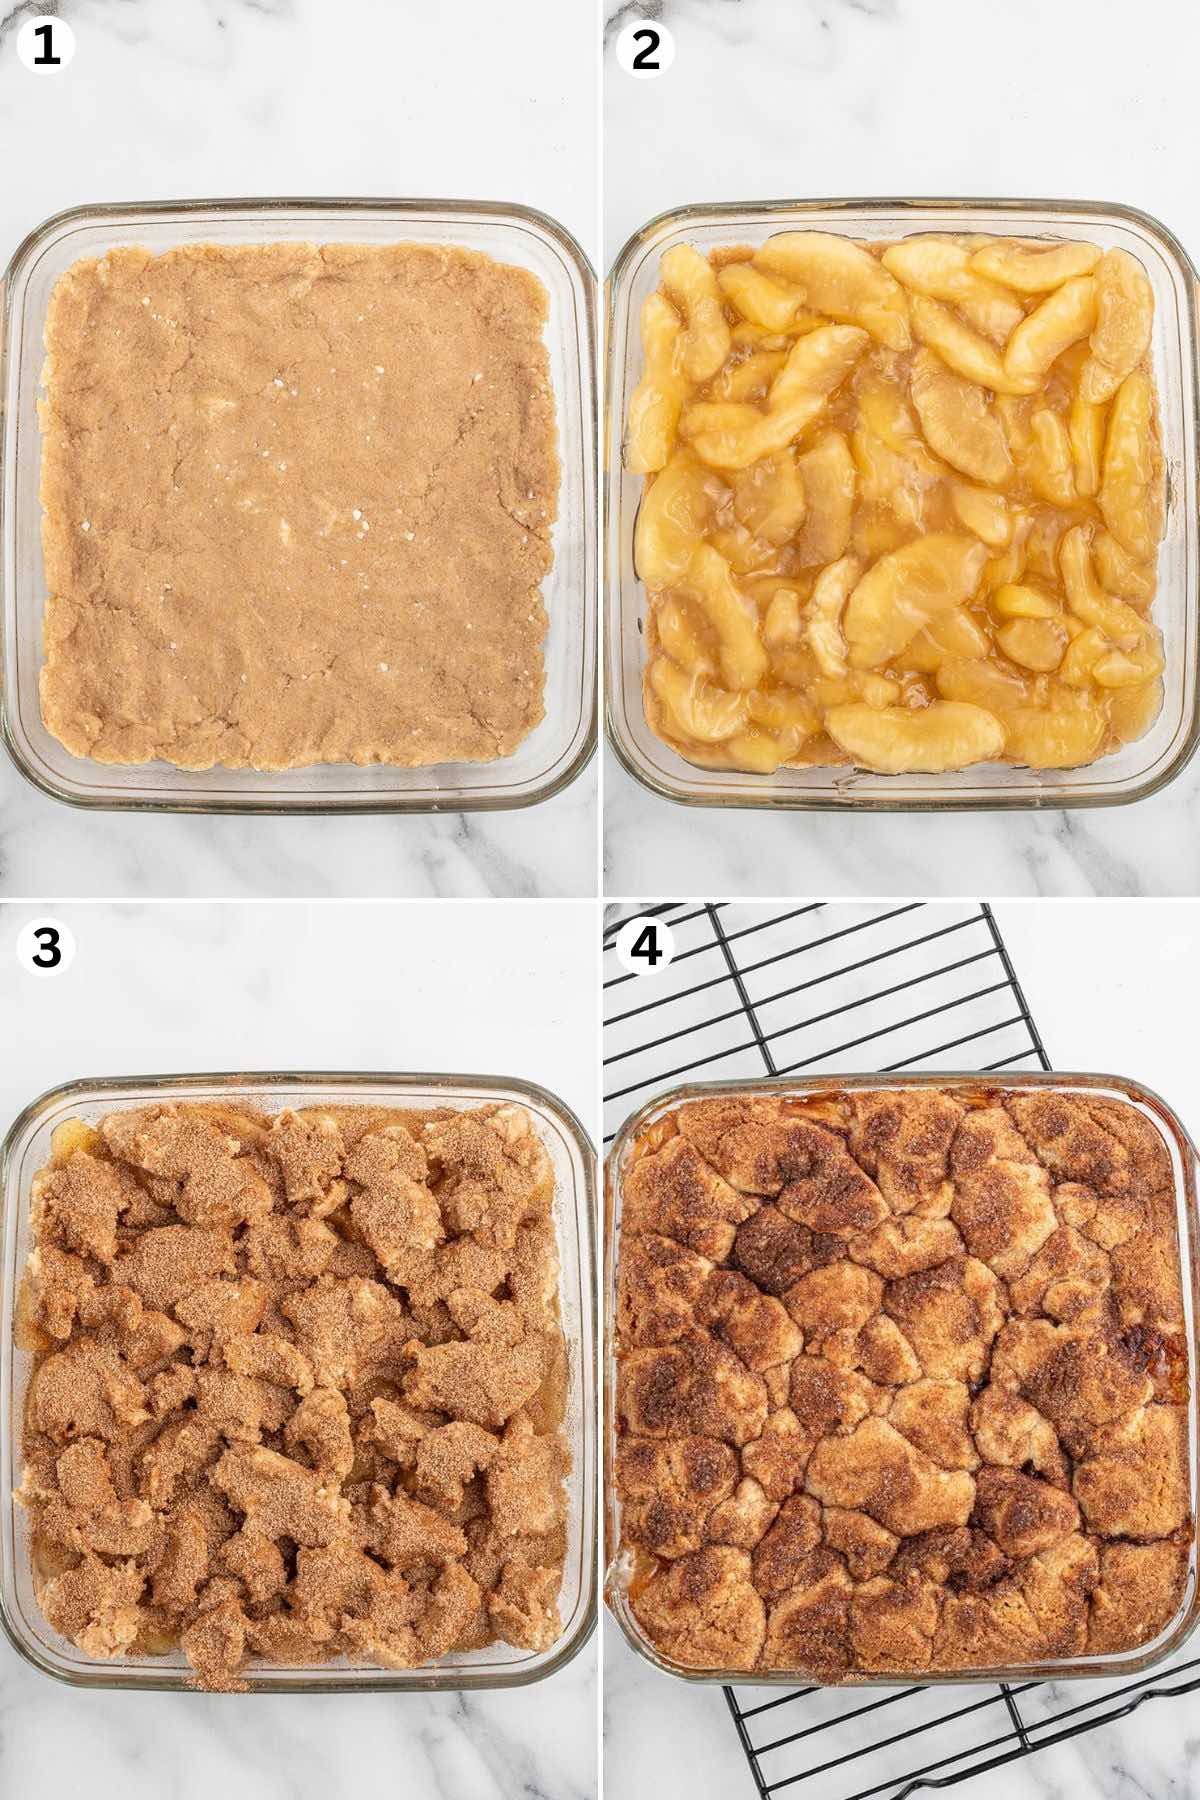 press the cookie mixture at the bottom of baking dish. pour the apple pie filling on top. put cookie dough crumble on top of the apple pie filling and bake.